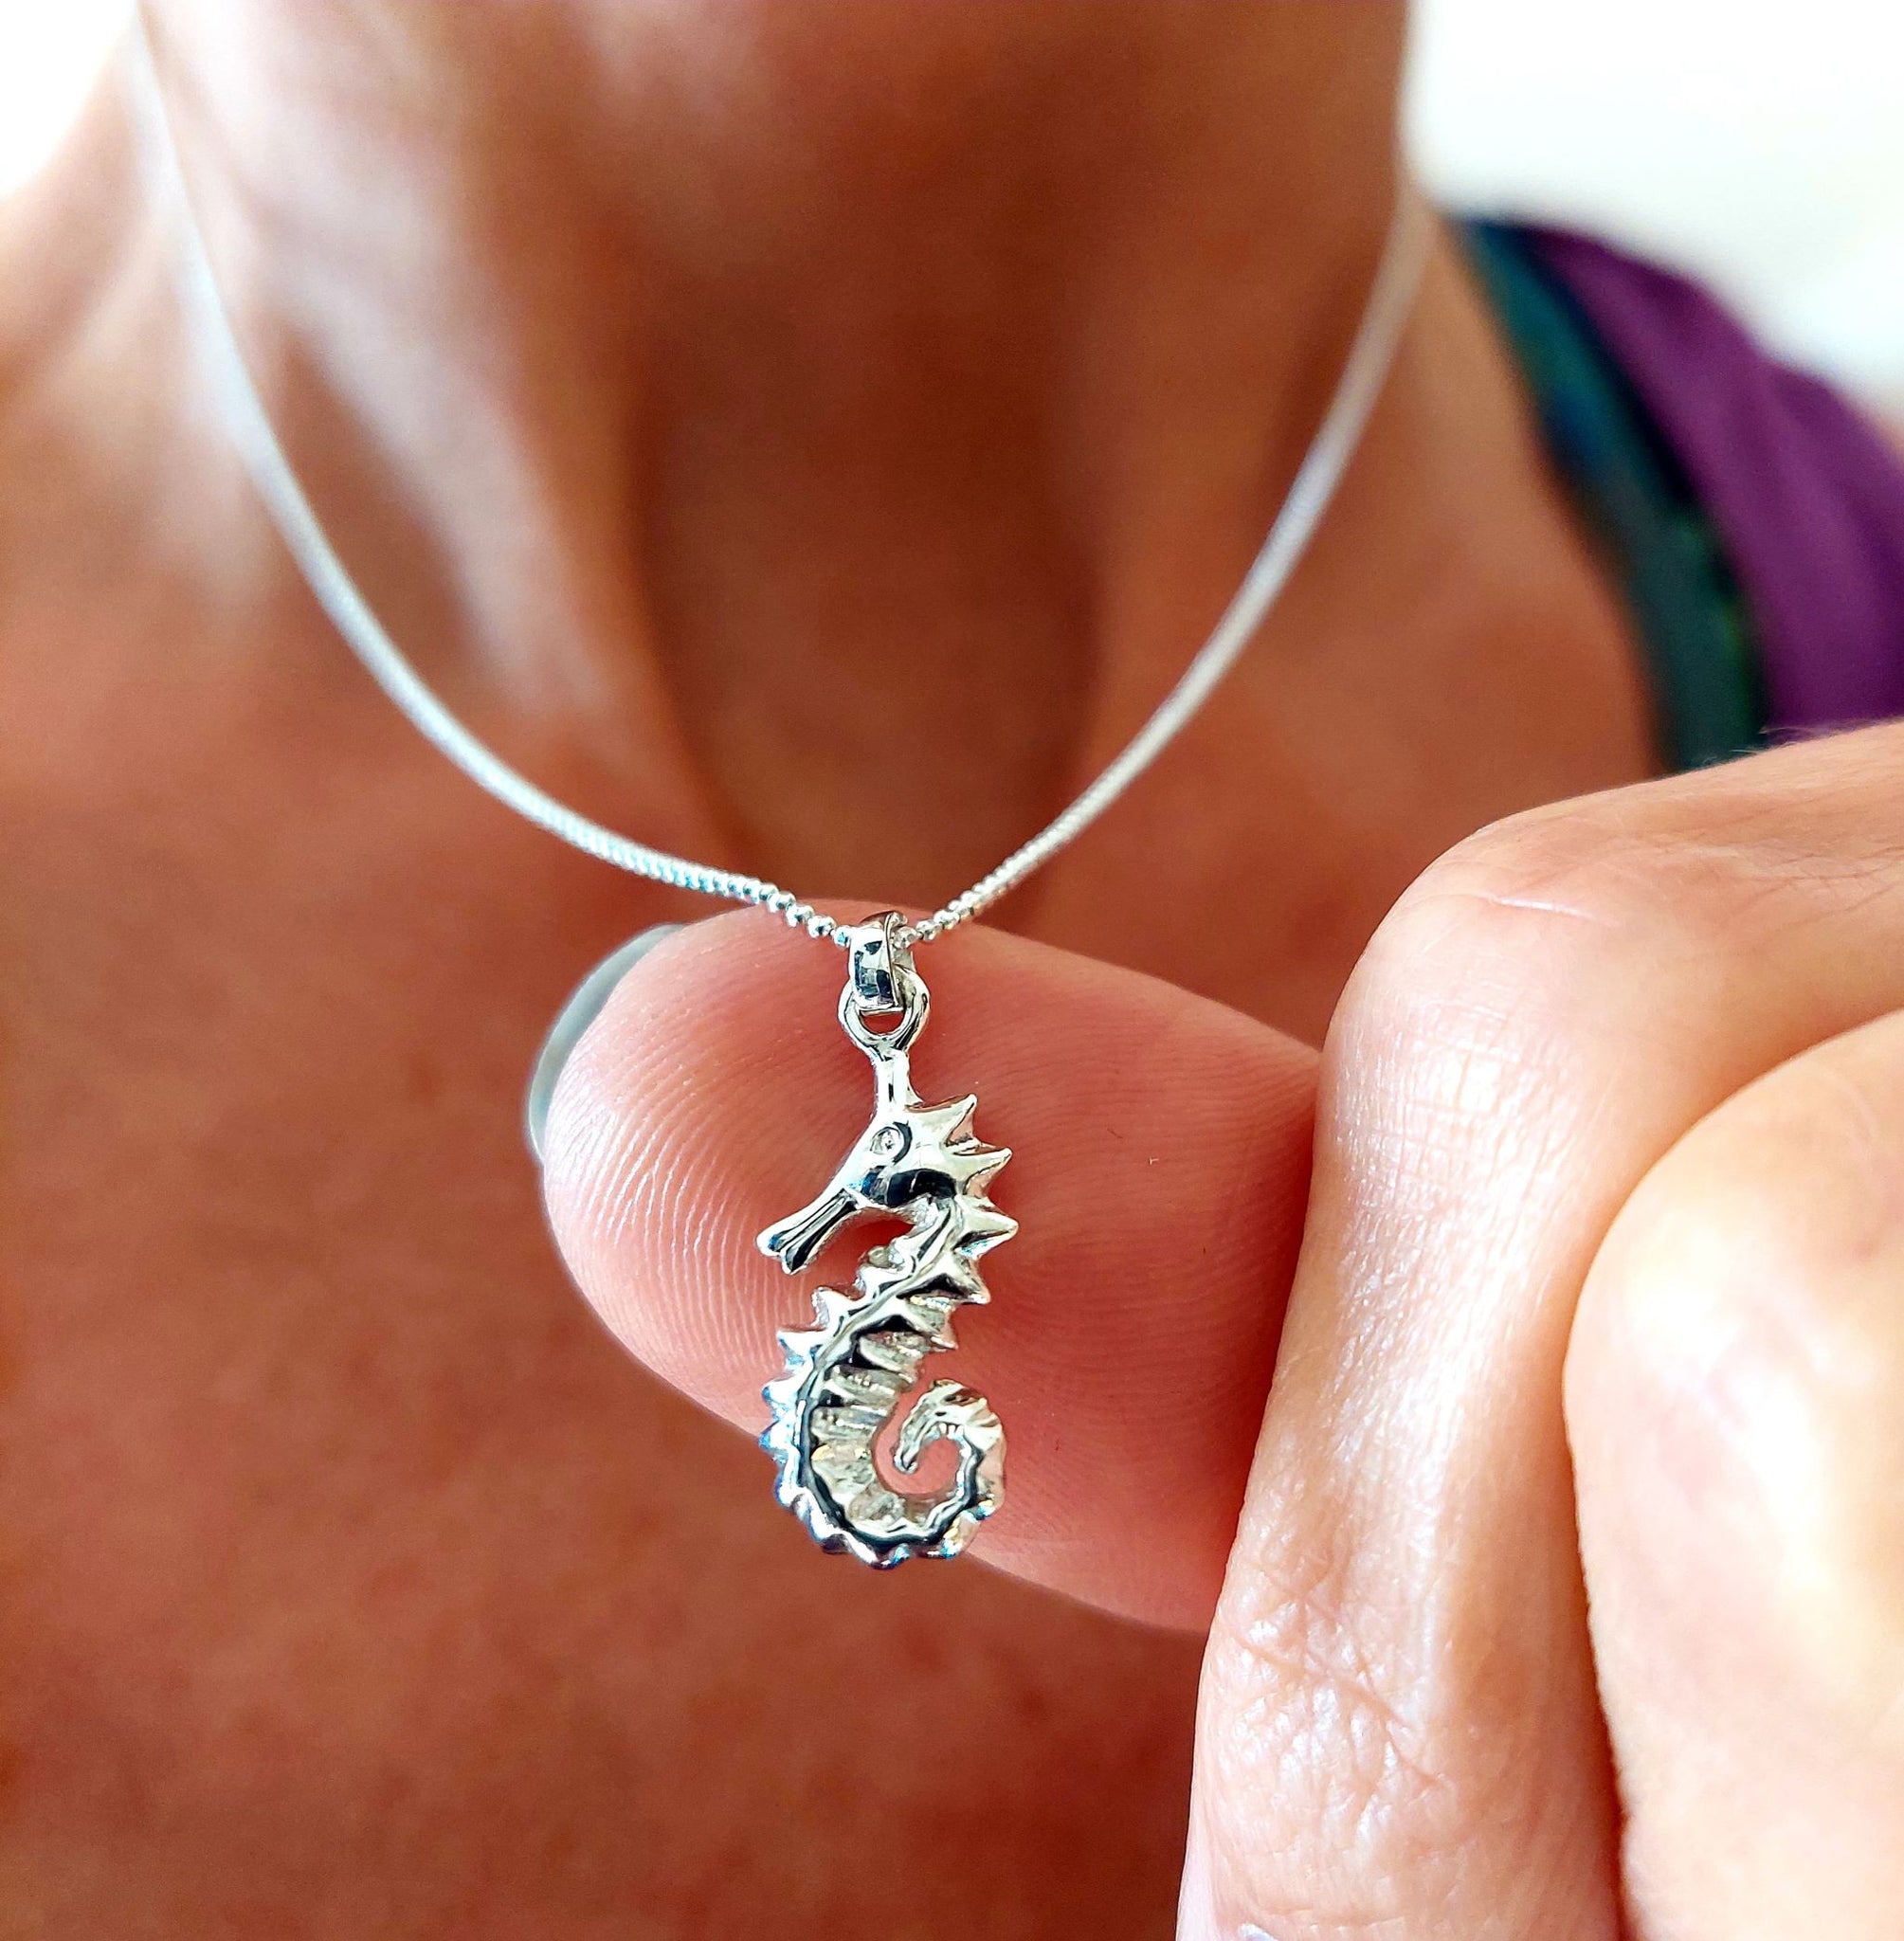 ﻿925 Hall Marked Sterling Silver  Adorable Engraved Silver Seahorse Pendant   H 20 mm x W 10 mm    18" Silver 1 mm diamond cut chain  Lovely gift for a beach buddy!   **Presented in lovely Kraft paper gift box with reusable organza pouch**